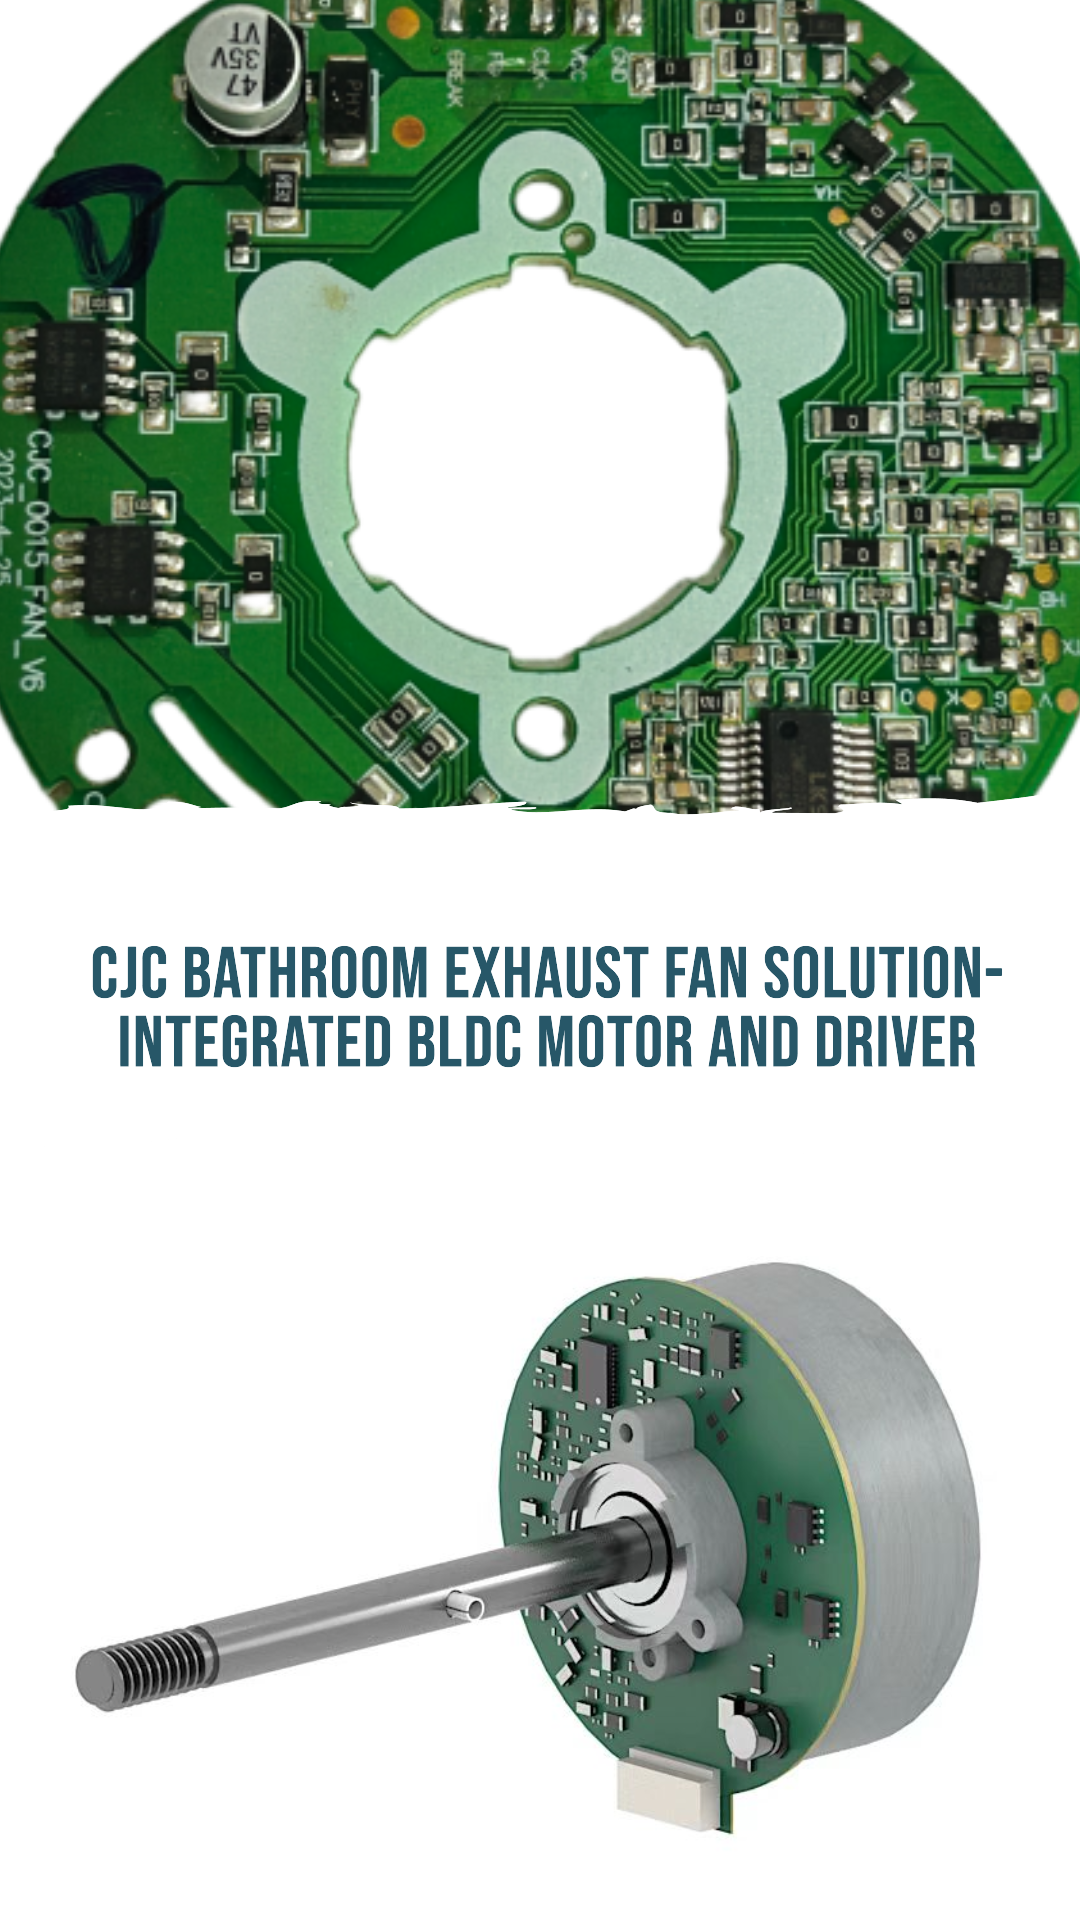 CJC INTEGRATED BATHROOM EXHAUST FAN BLDC MOTOR AND CONTROLLER SOLUTION